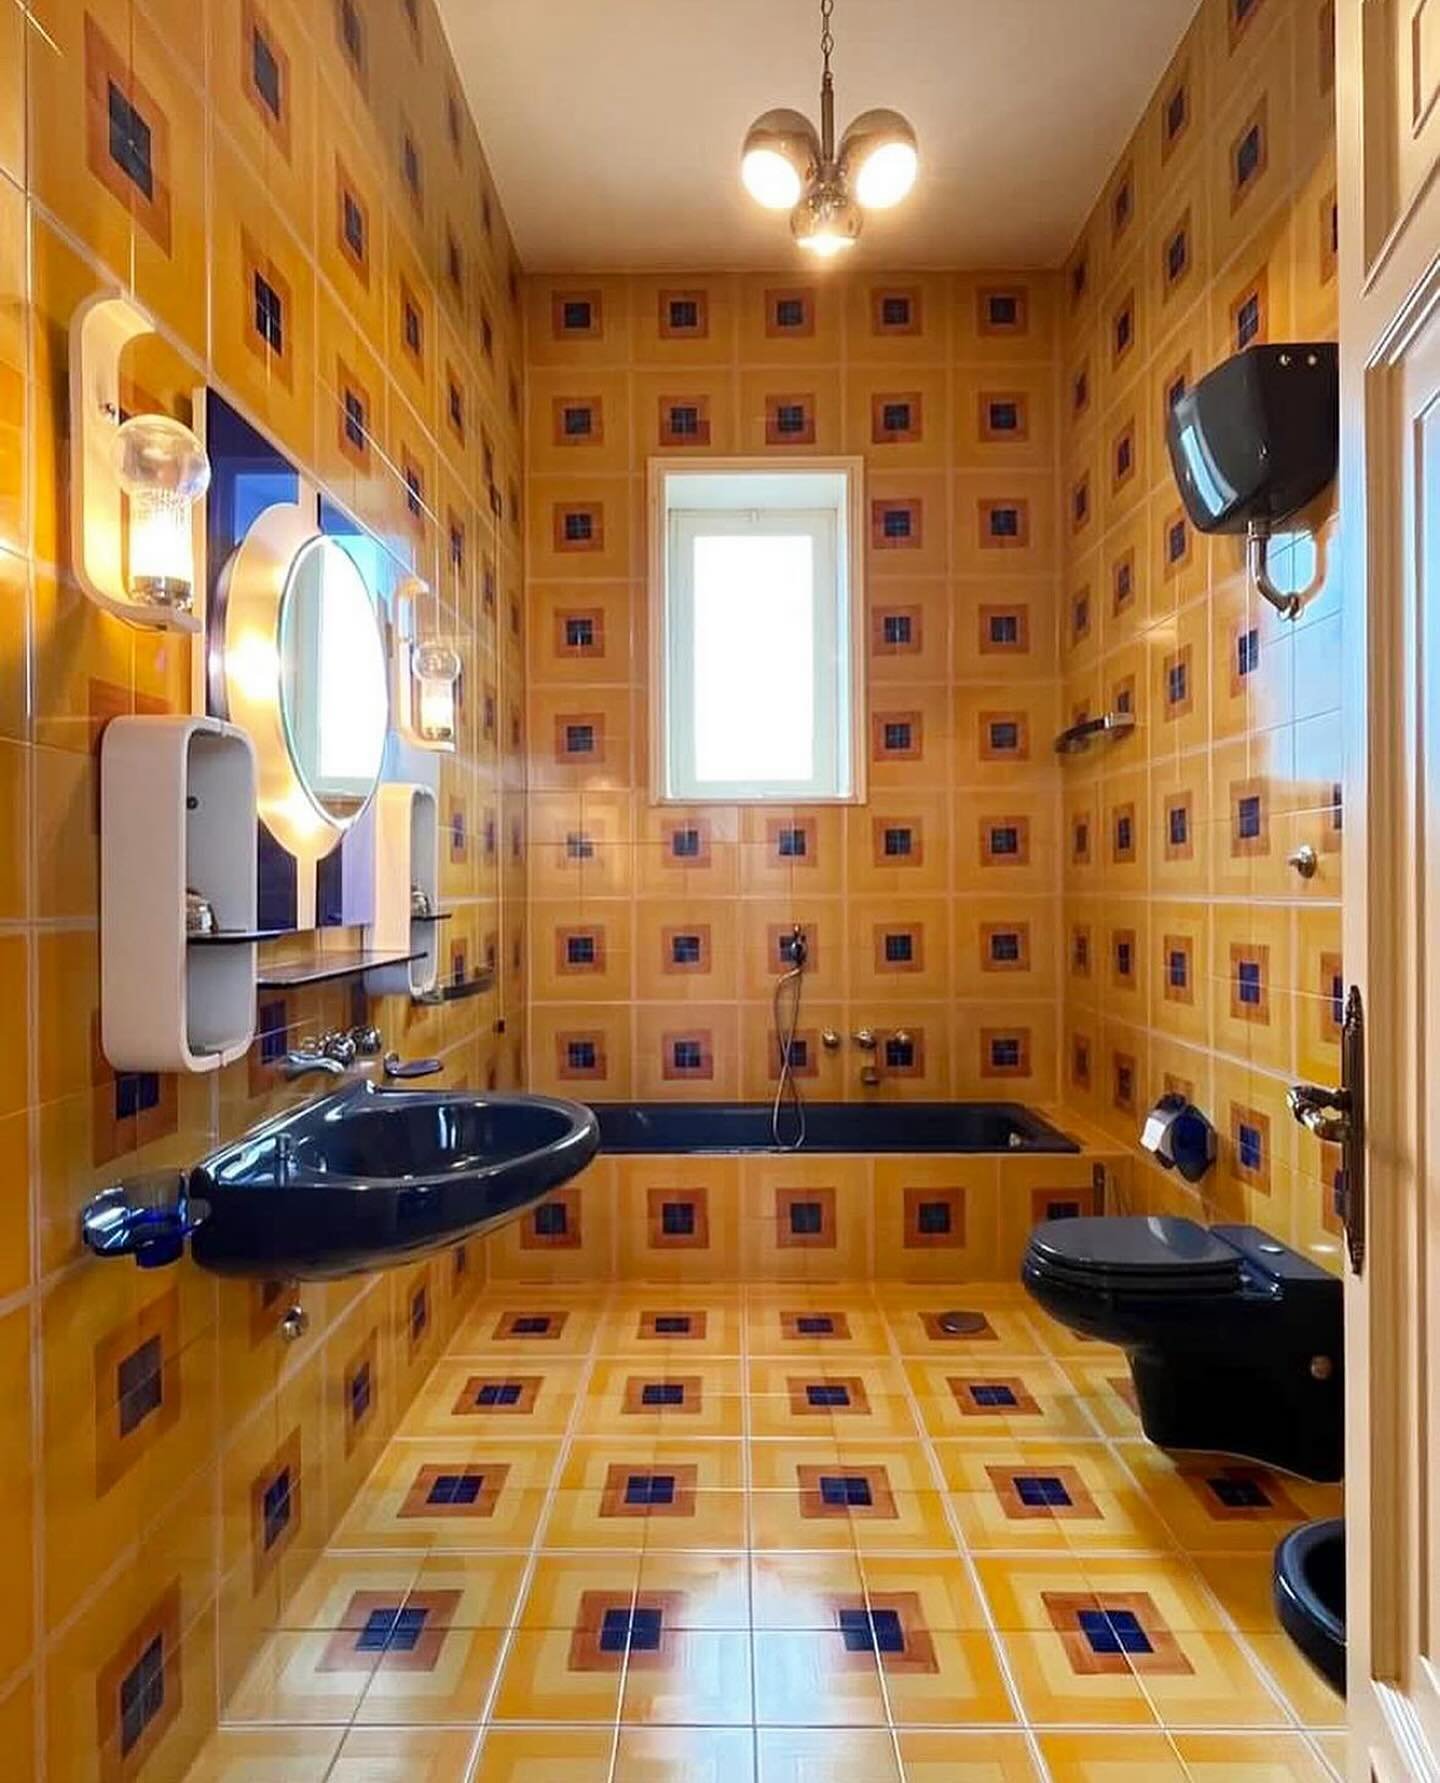 1970s tile-clad bathroom in the home of @whereiseugenio located in Southern Italy